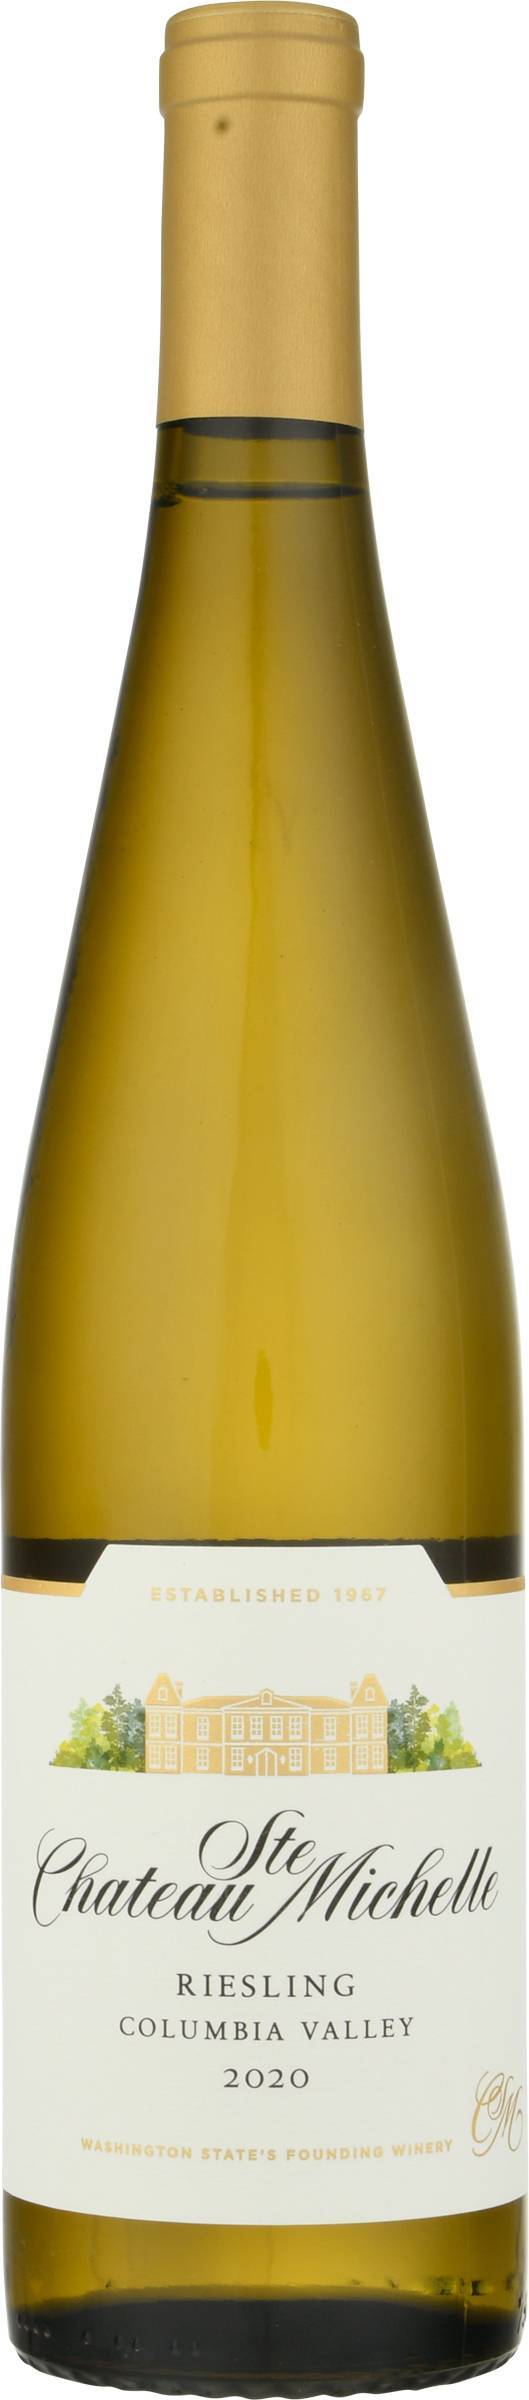 Chateau Ste. Michelle Riesling Columbia Valley Wine (750 ml)